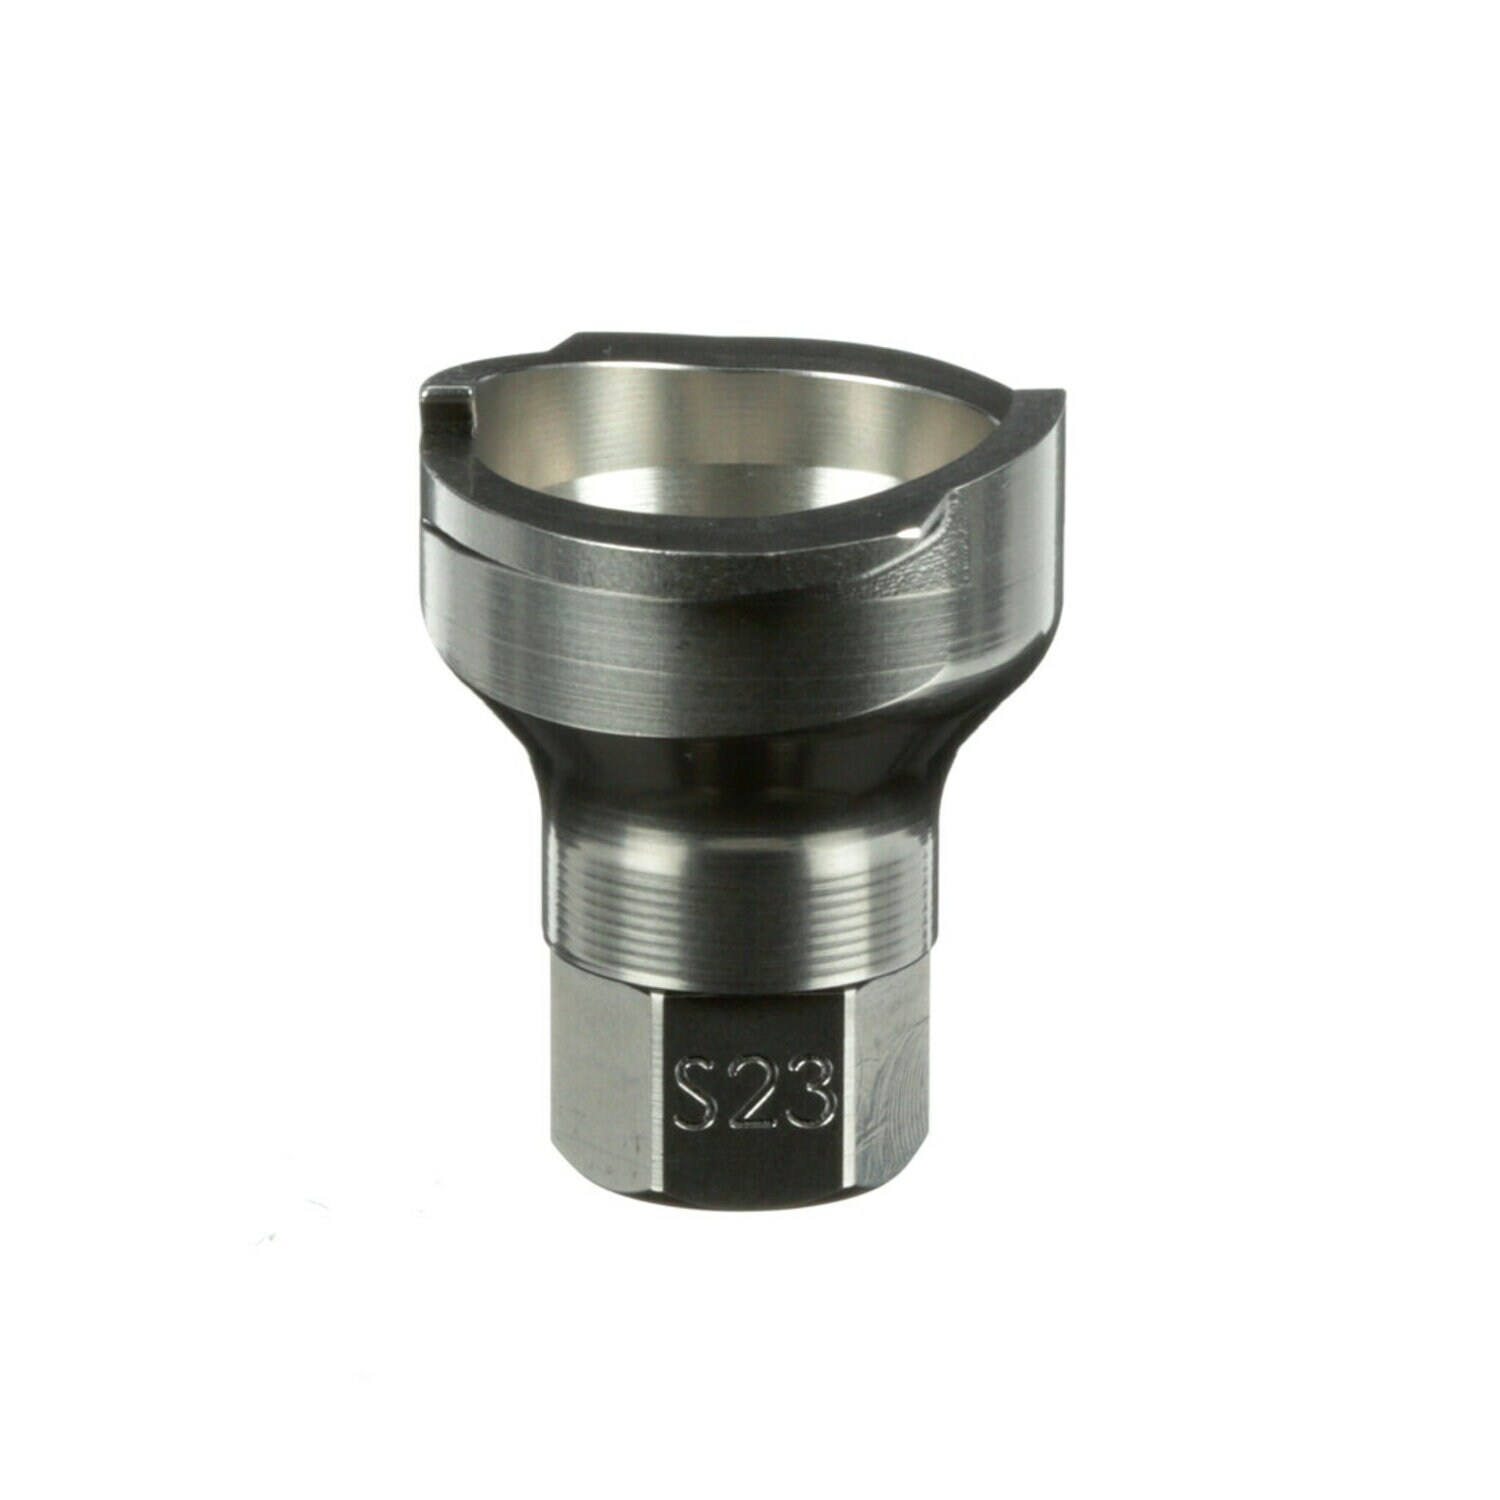 https://www.e-aircraftsupply.com/ItemImages/85/1851080E_3m-pps-series-2-0-adapter-s23-26109-1-4-female-18-thread-nps-catalog-image.jpg